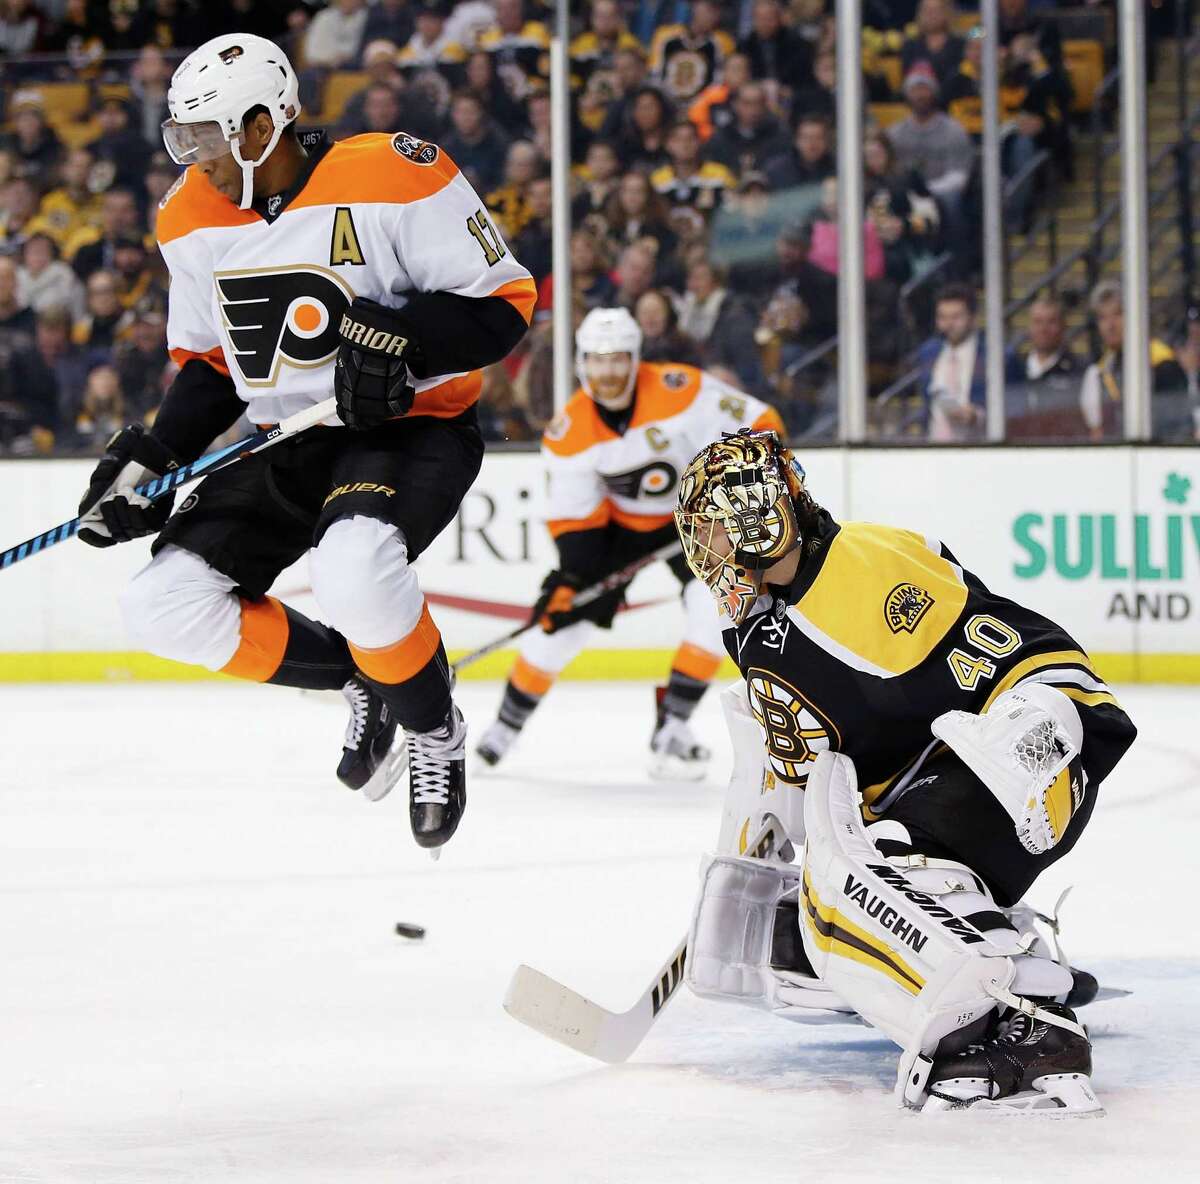 Philadelphia's Wayne Simmonds jumps to avoid a shot on goal while screening Boston's Tuukka Rask, who deflects the puck during the first period of Saturday night's game at Boston.